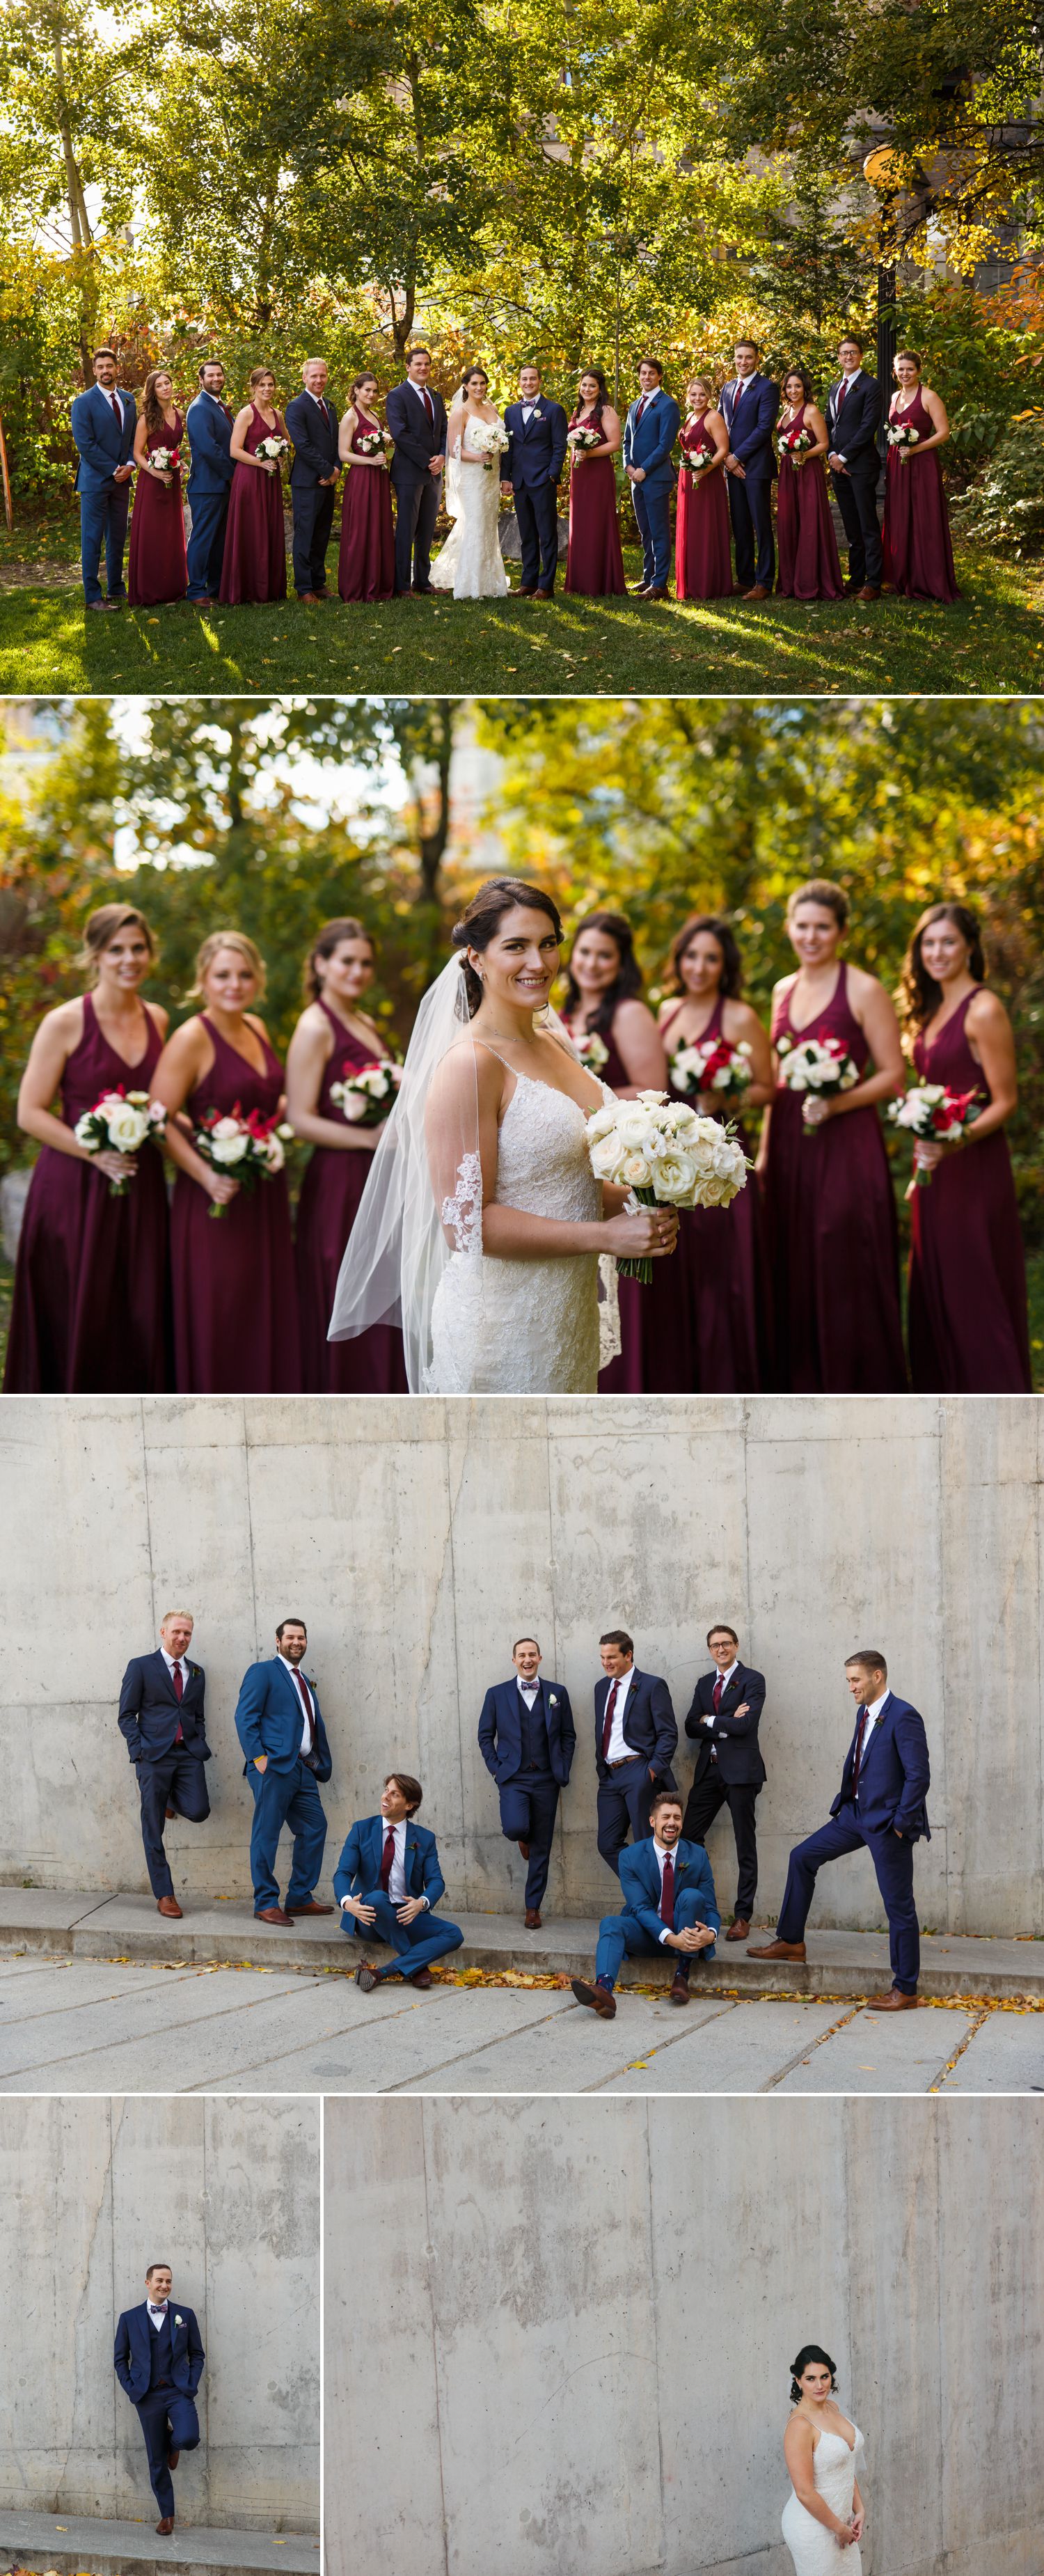 Portraits of the bride and groom with their wedding party at The Museum of Nature in downtown Ottawa